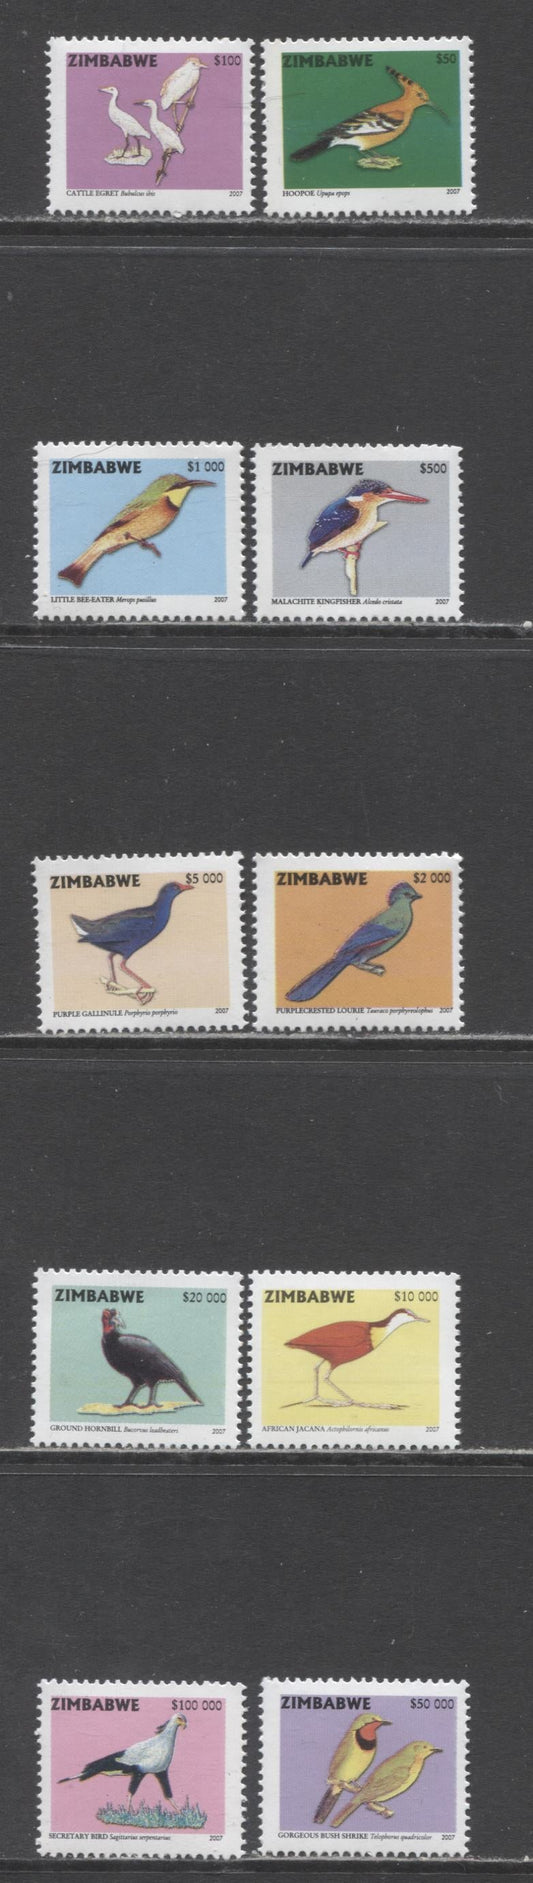 Lot 57 Zimbabwe SC#1034-1043 2007 Bird Definitives, 10 F/VFNH Singles, Click on Listing to See ALL Pictures, 2017 Scott Cat. $65.5